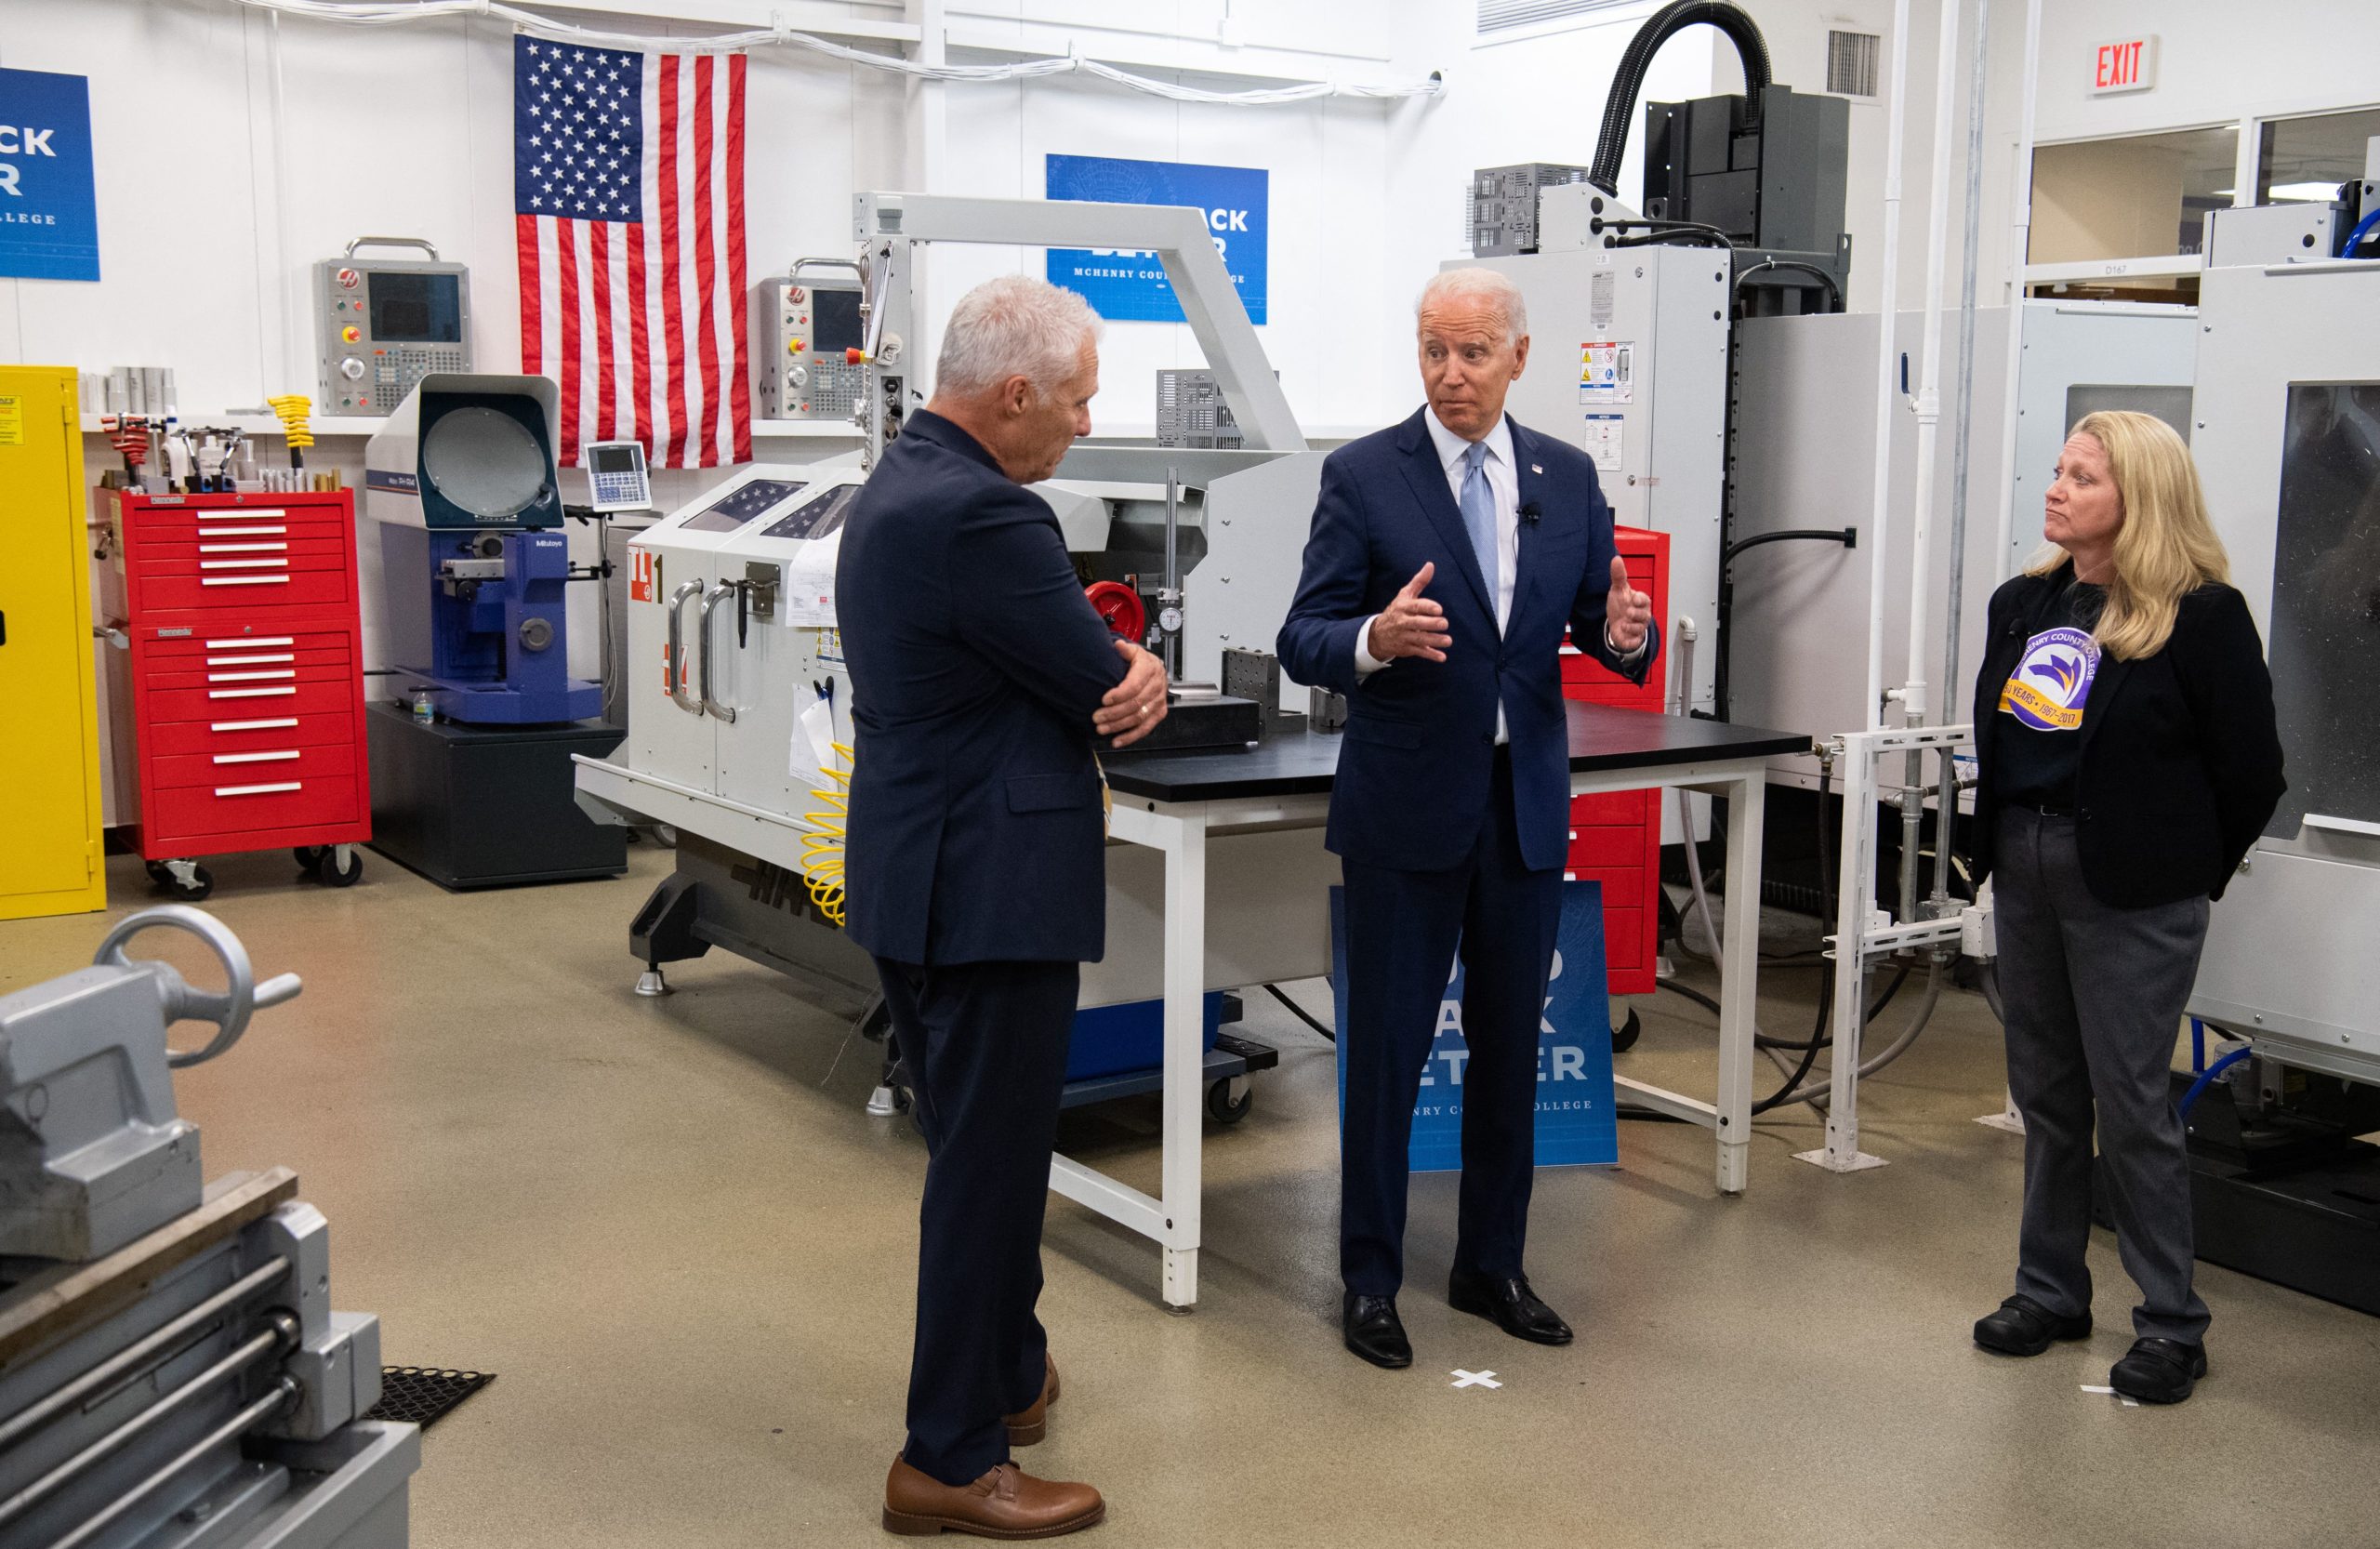 US President Joe Biden tours a manufacturing lab at McHenry County College in Crystal Lake, Illinois, on July 7, 2021. (Photo by SAUL LOEB/AFP via Getty Images)